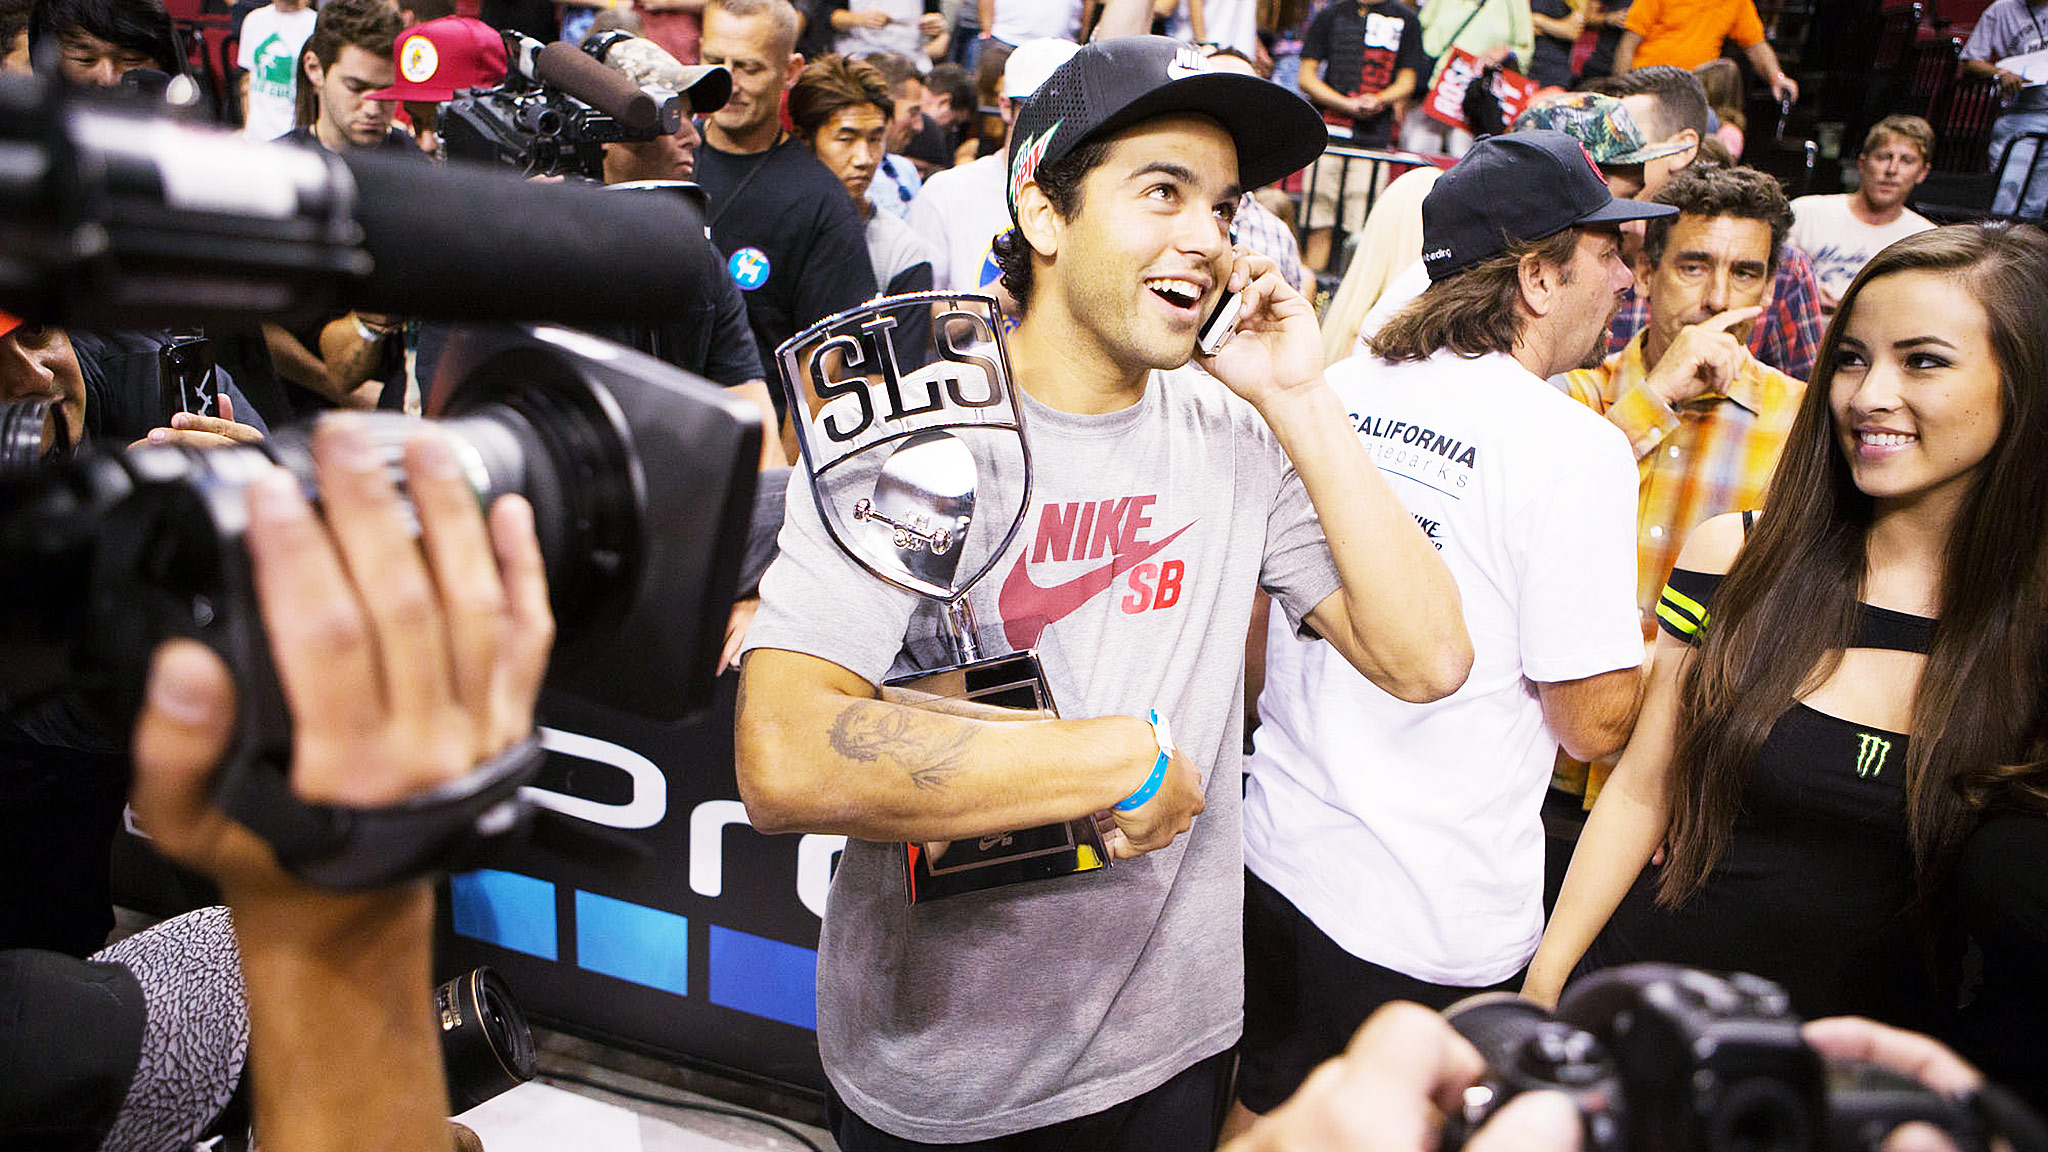 Paul Rodriguez sealed the deal on his final run in the Impact section, scoring a 8.8 with a frontside big-spin heelflip.